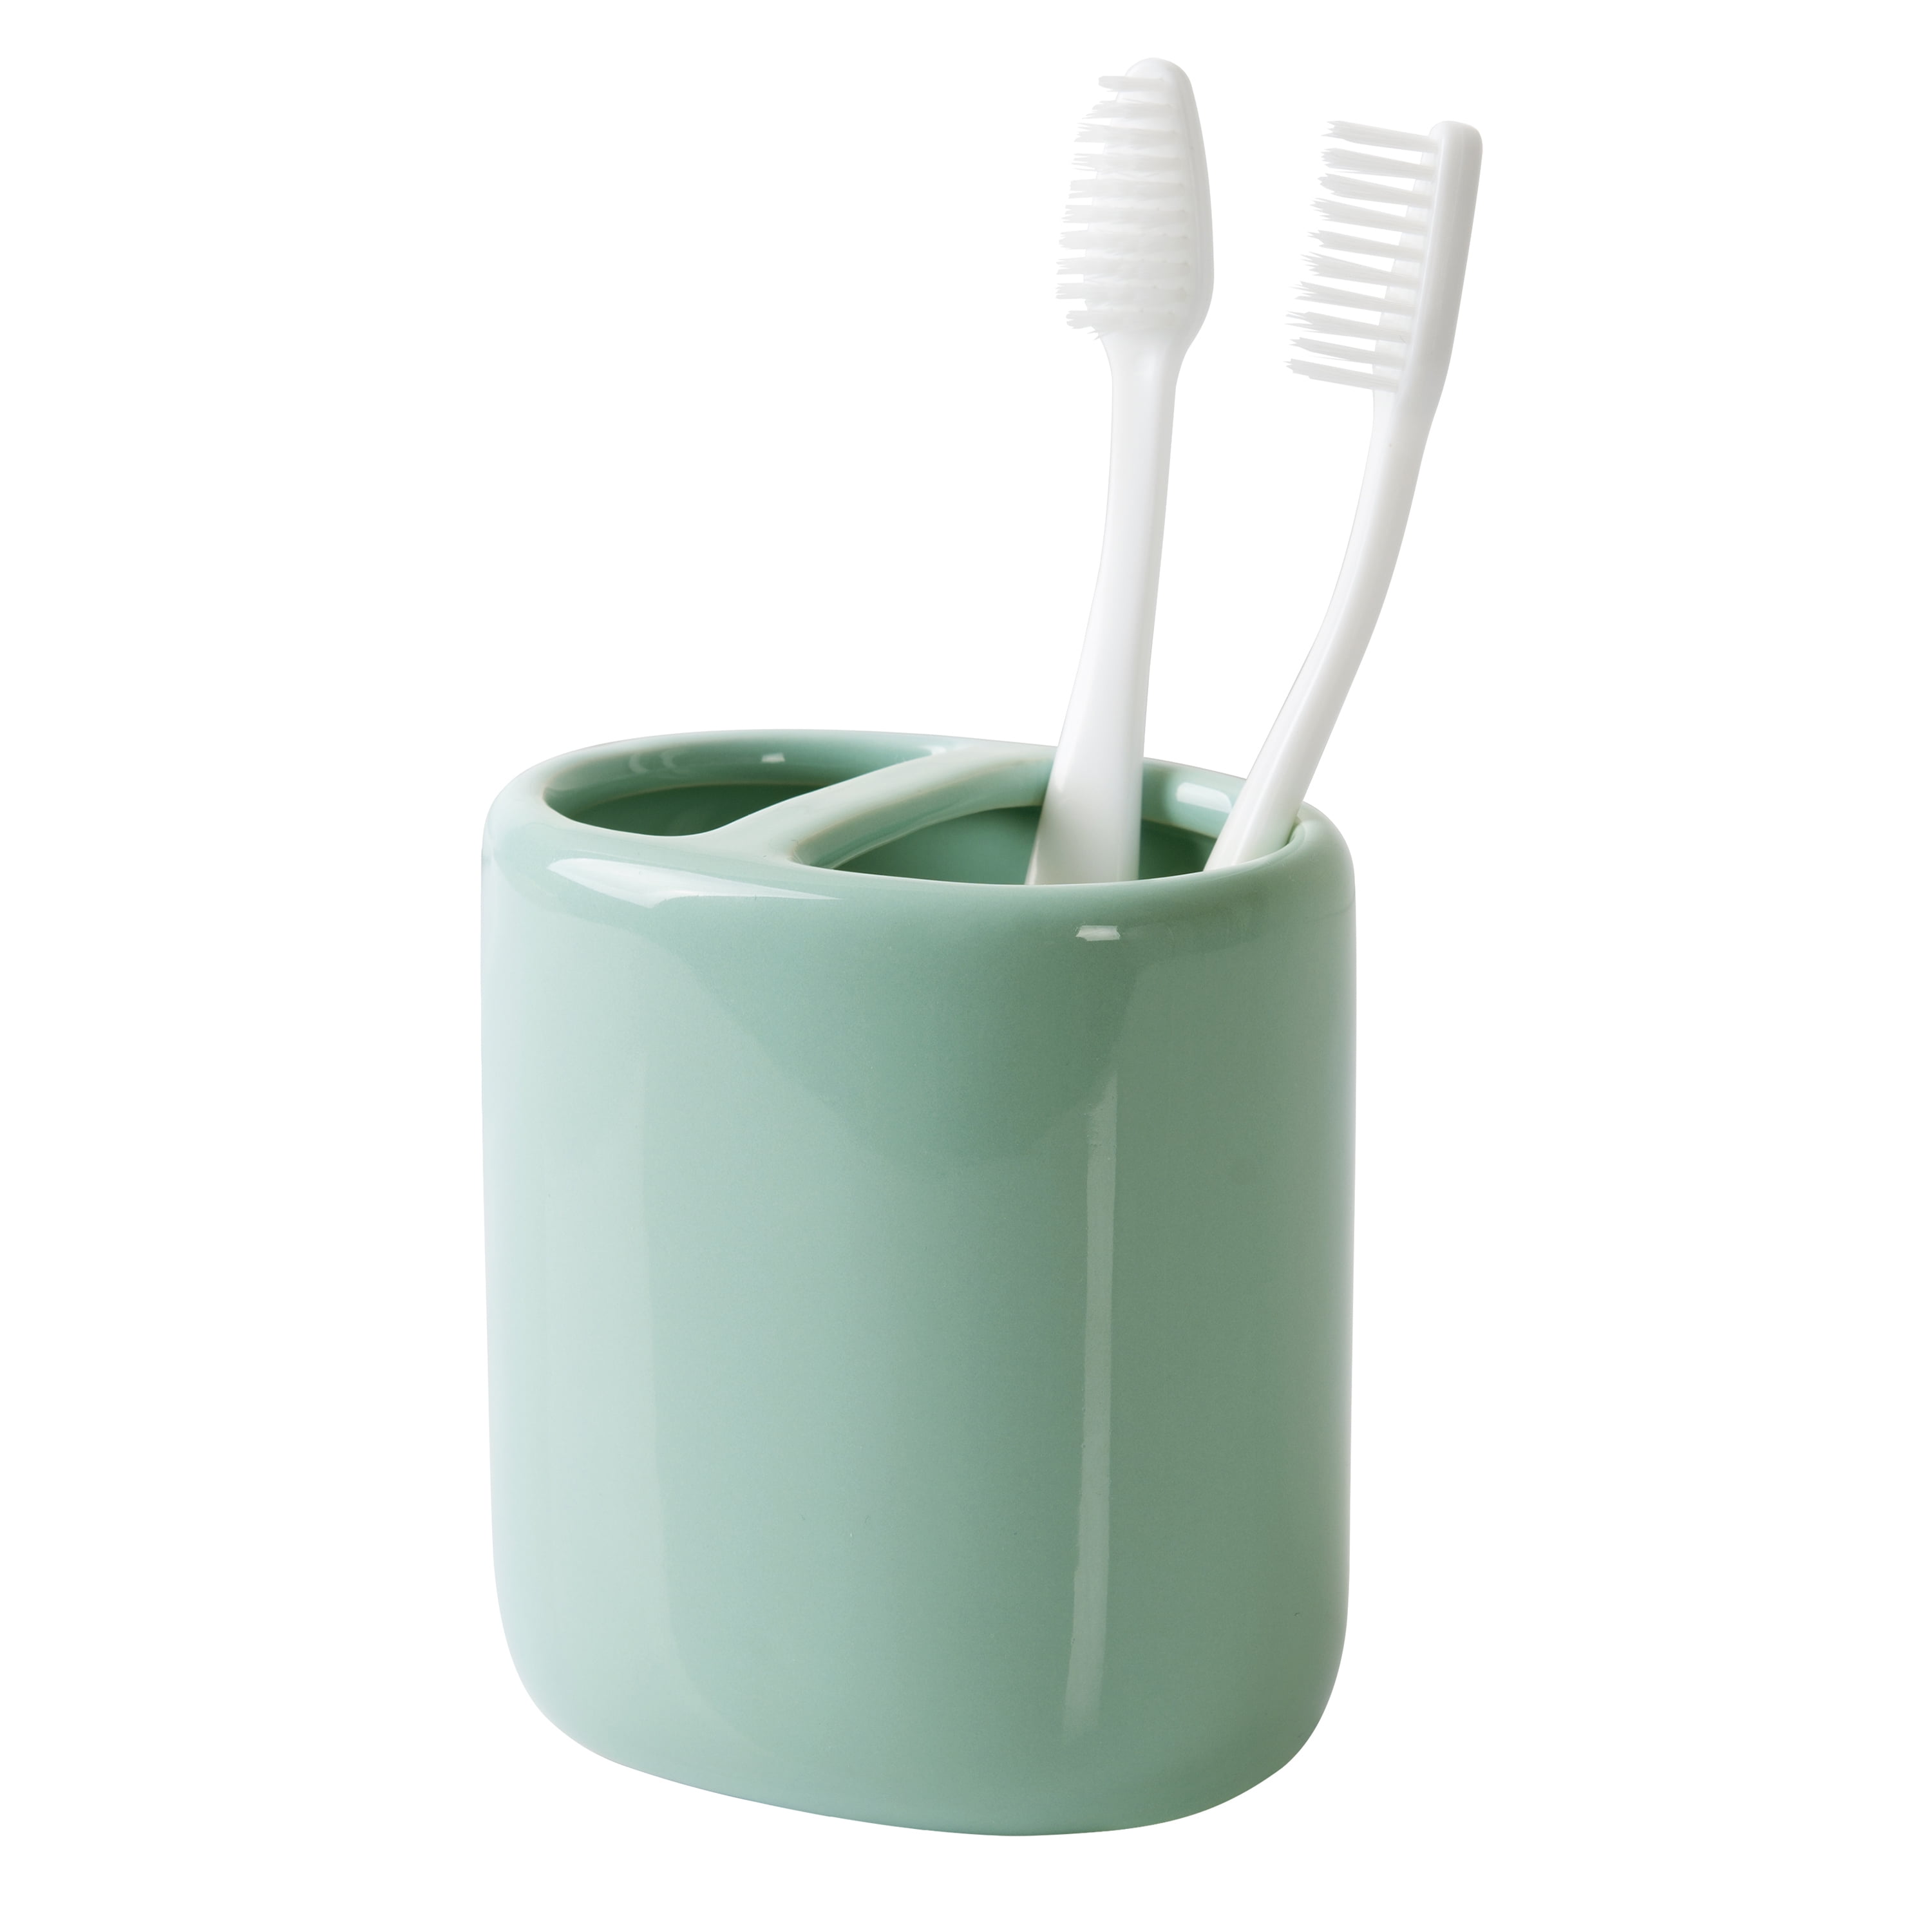 Utensil Drainer Caddy - Toothbrush Holder - Aqua Mist Collection — Back Bay  Pottery